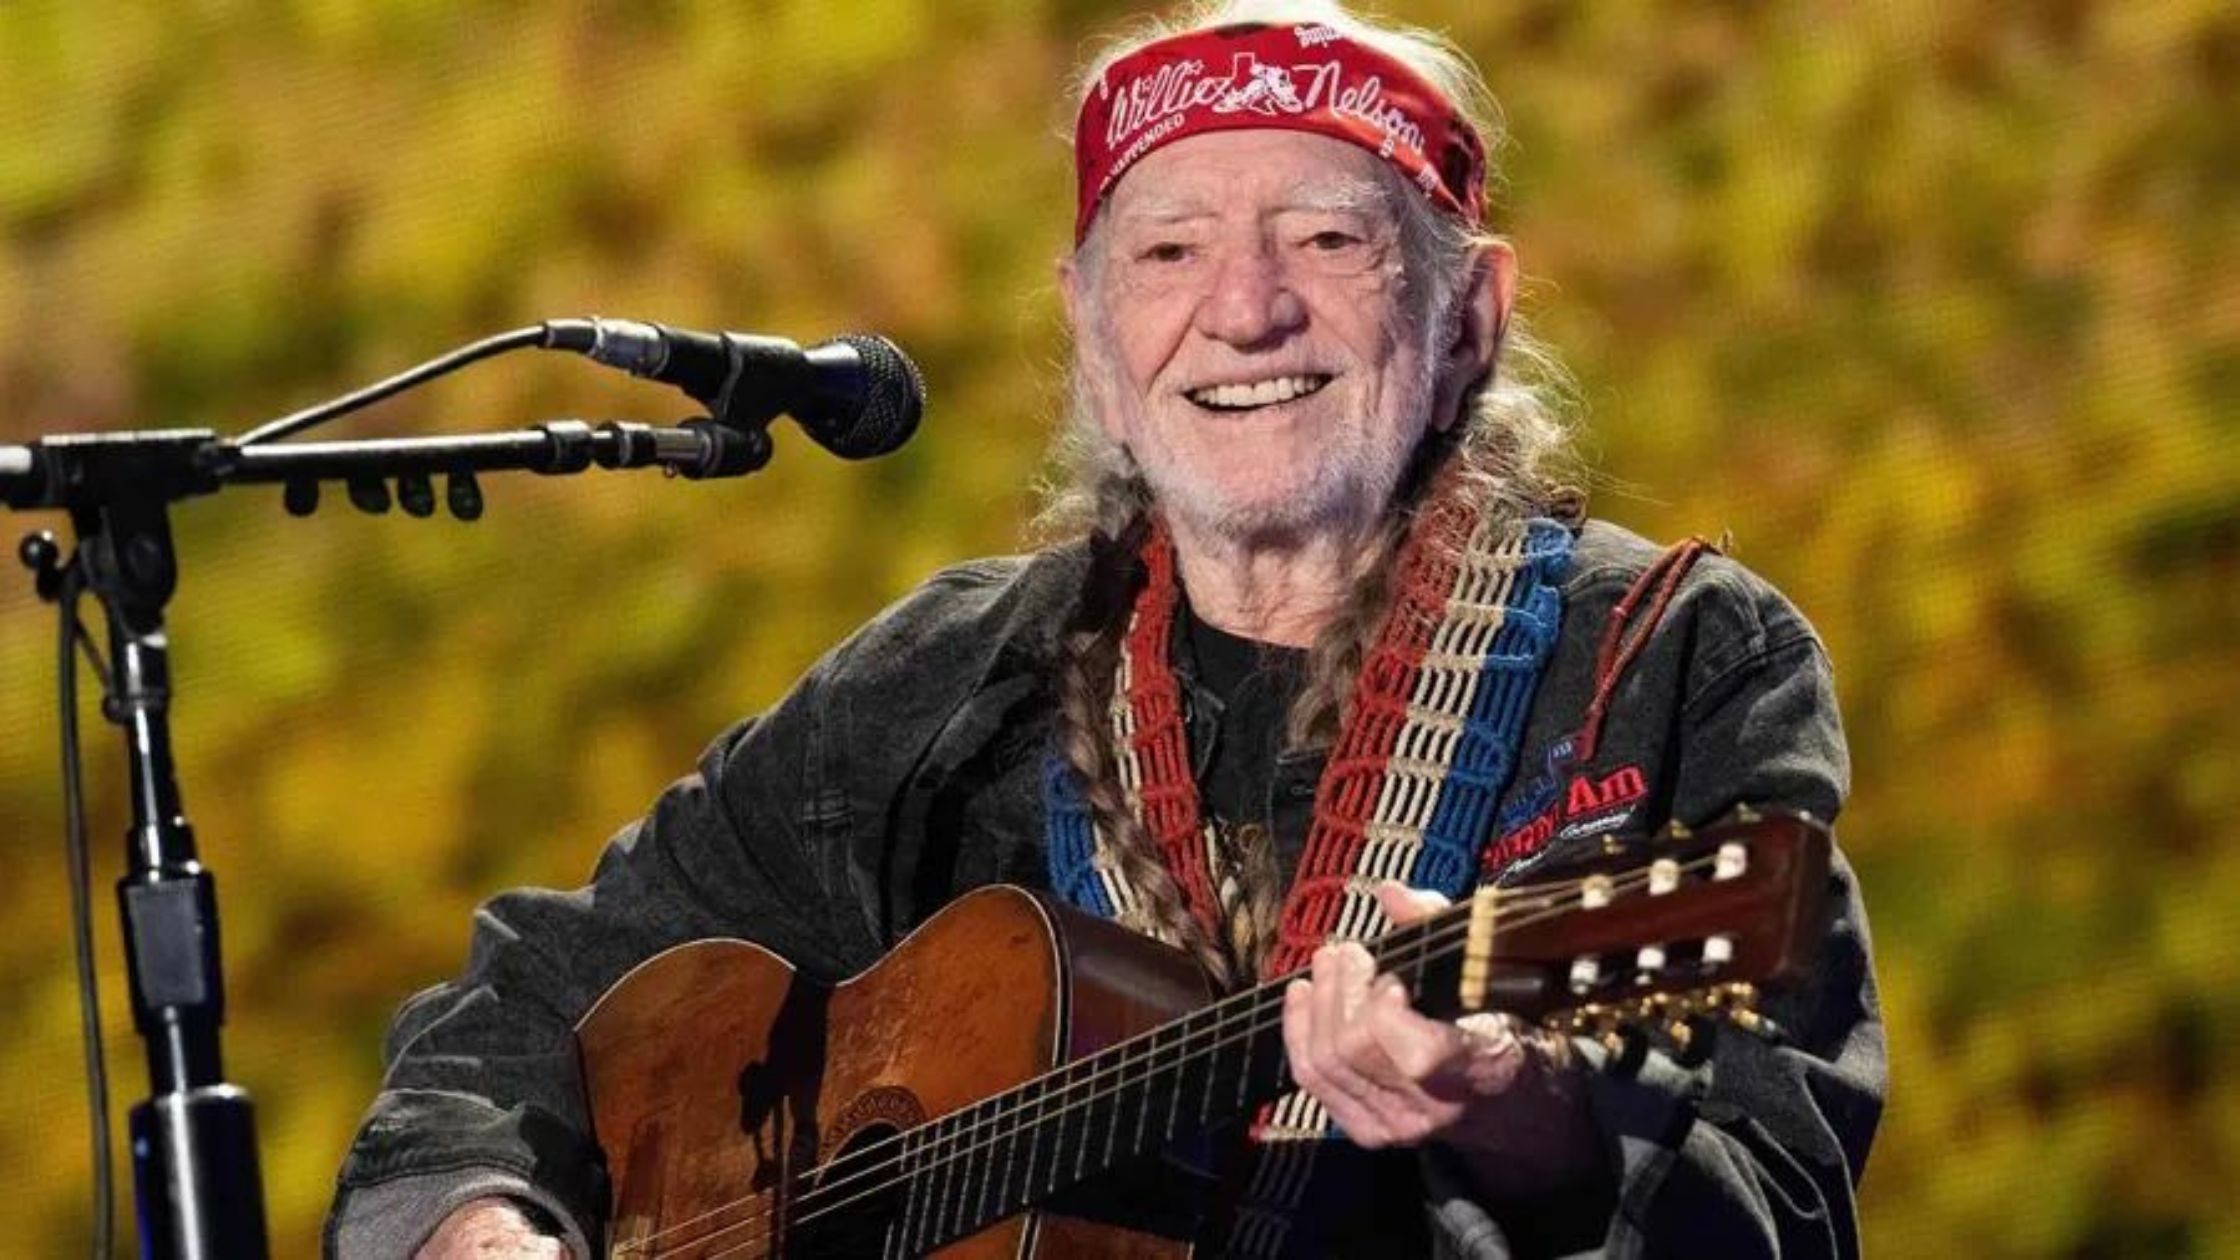 Willie Nelson Returns to Lauridsen Amphitheater at Water Works Park for a Memorable Concert Experience